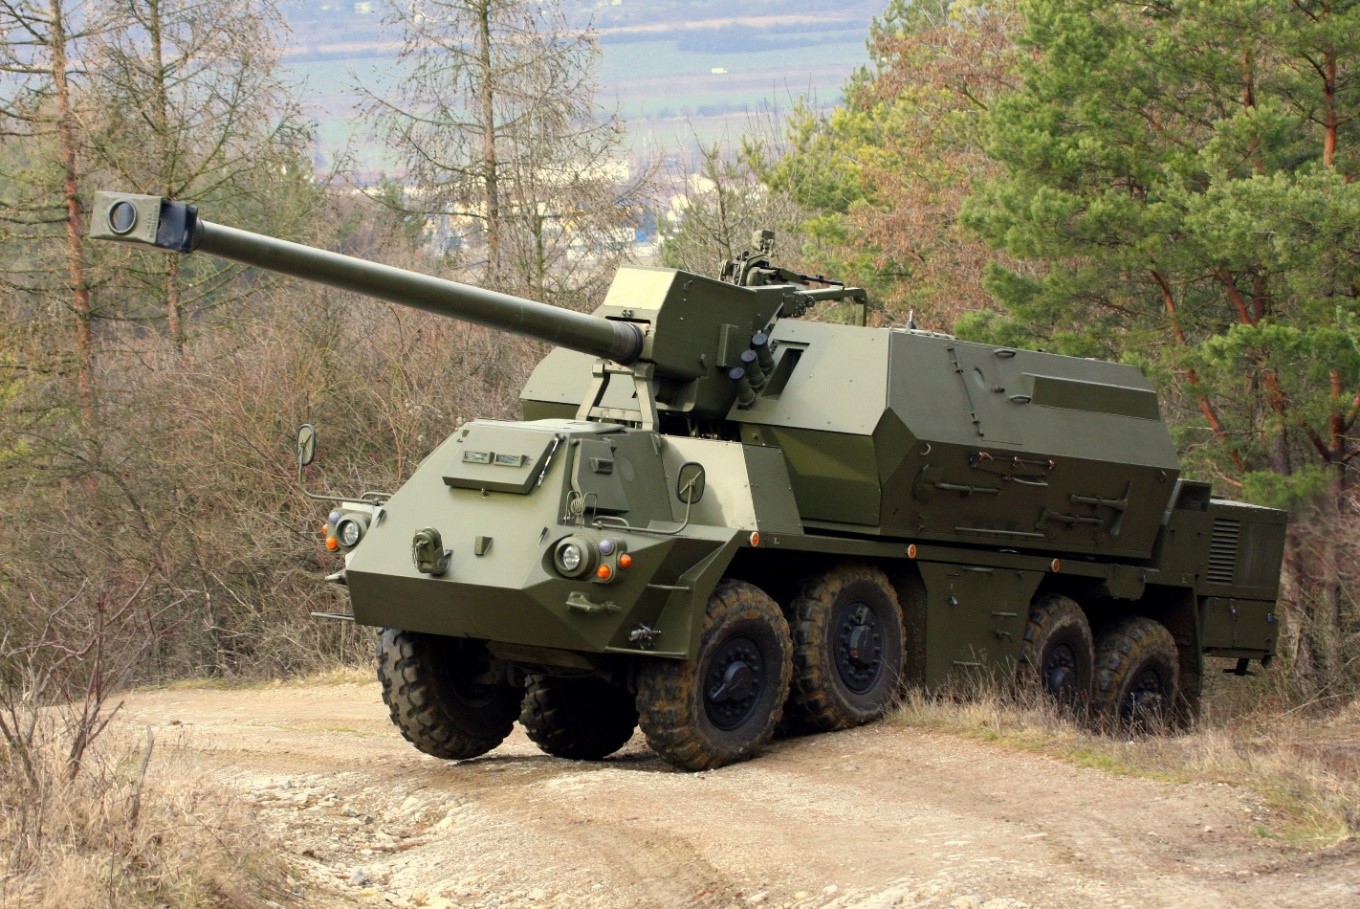 Ukraine will soon receive the first two self-propelled howitzers, Defense Express